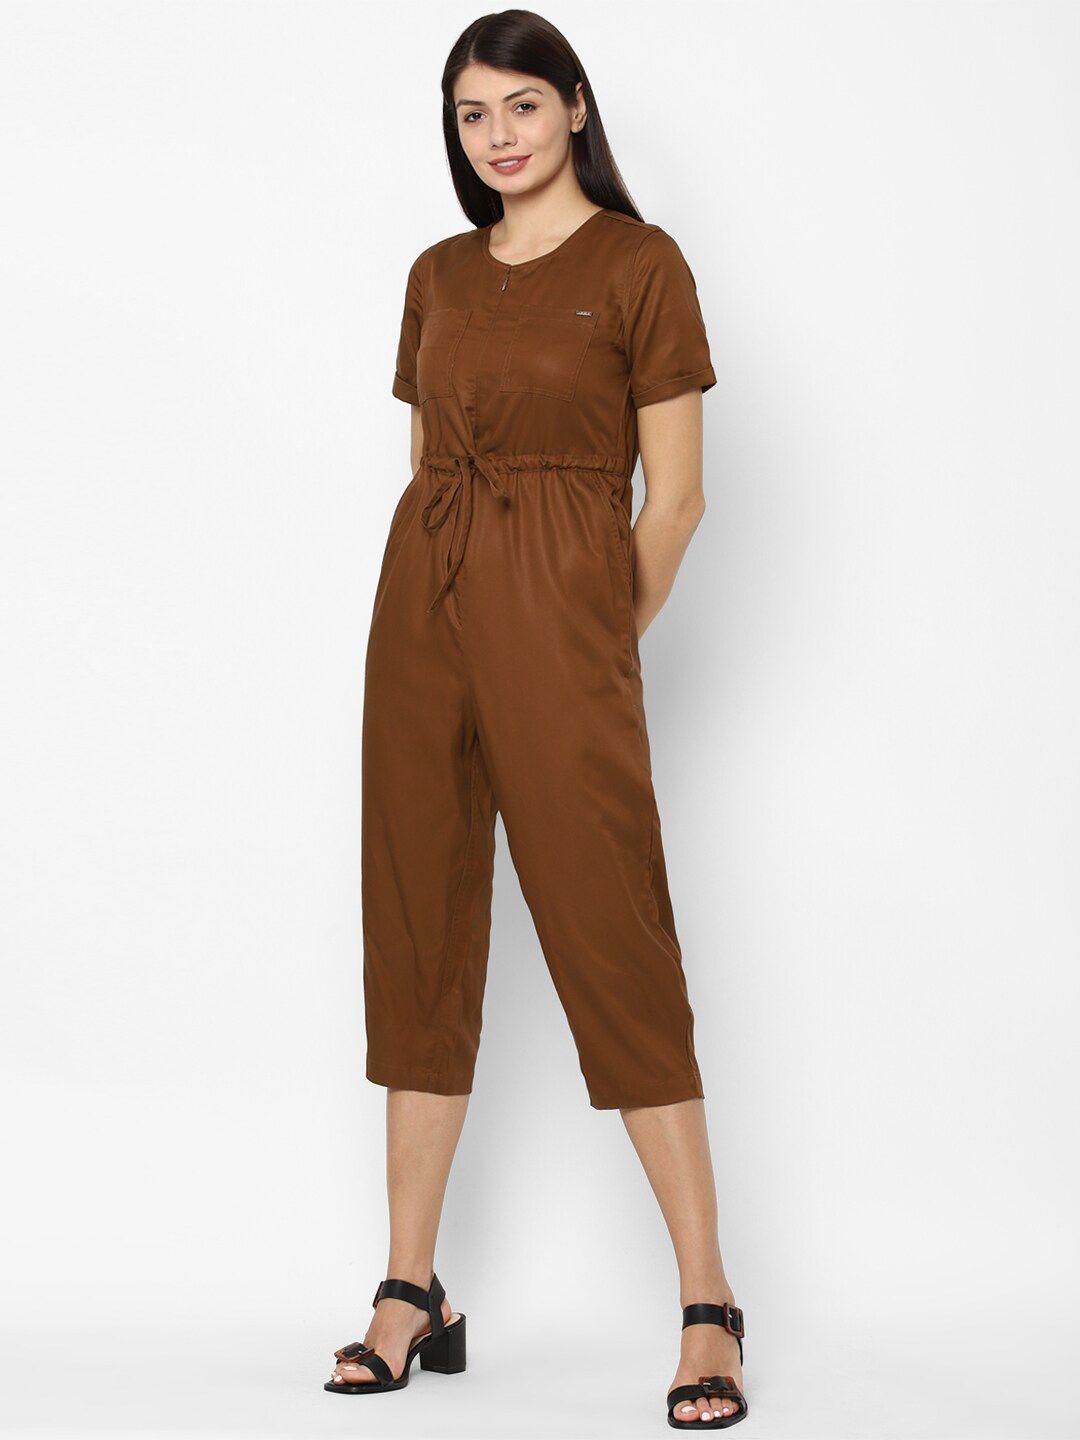 allen-solly-woman-brown-solid-tencel-basic-jumpsuit